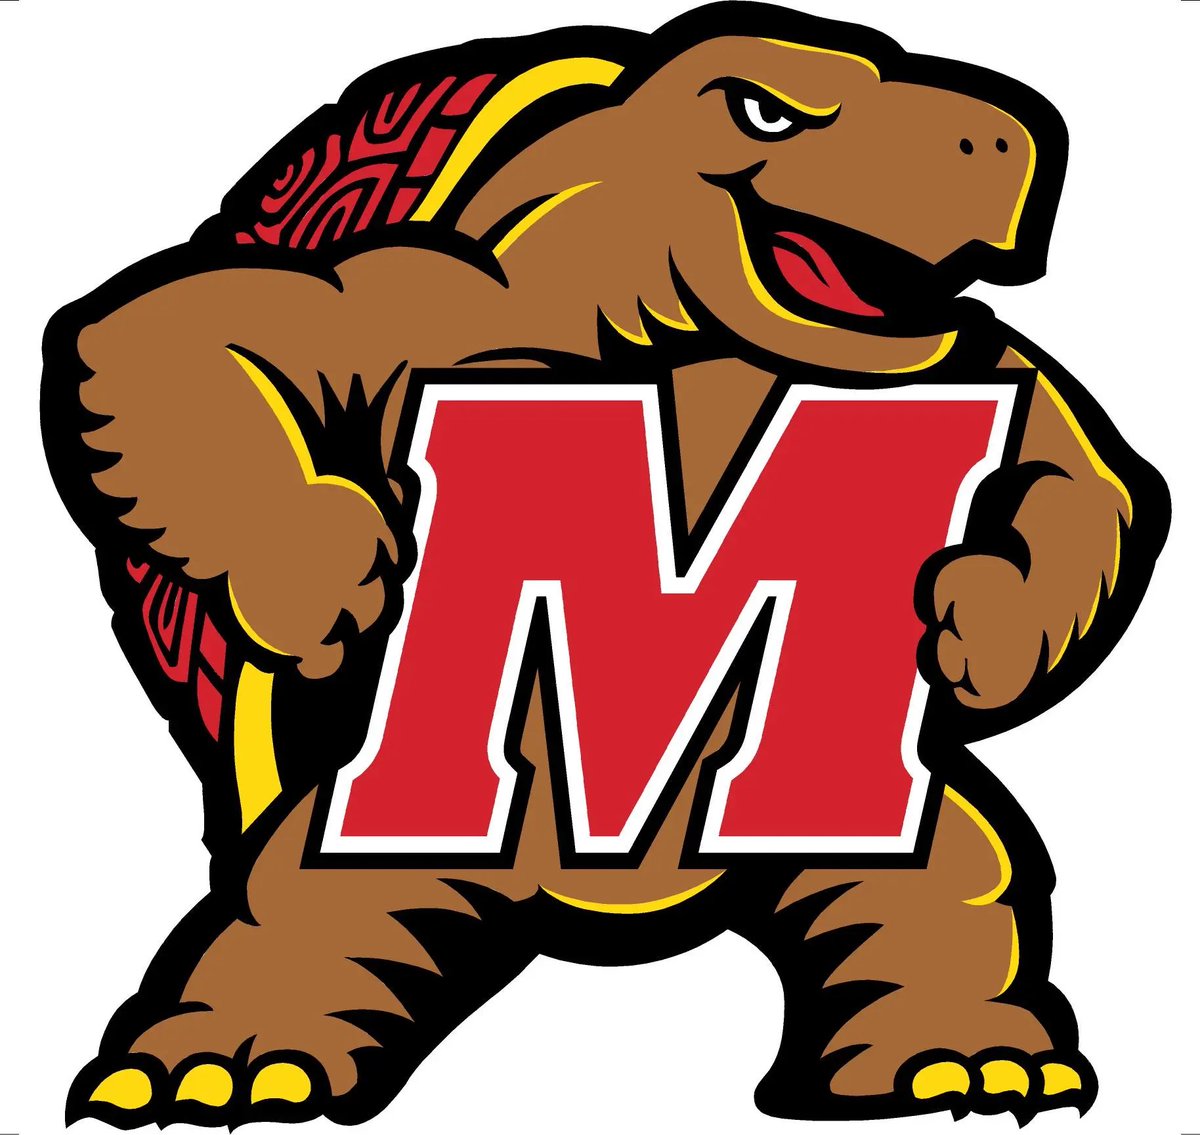 I’ll be at The University Of Maryland today!!
#TBIA #CR #Goterps